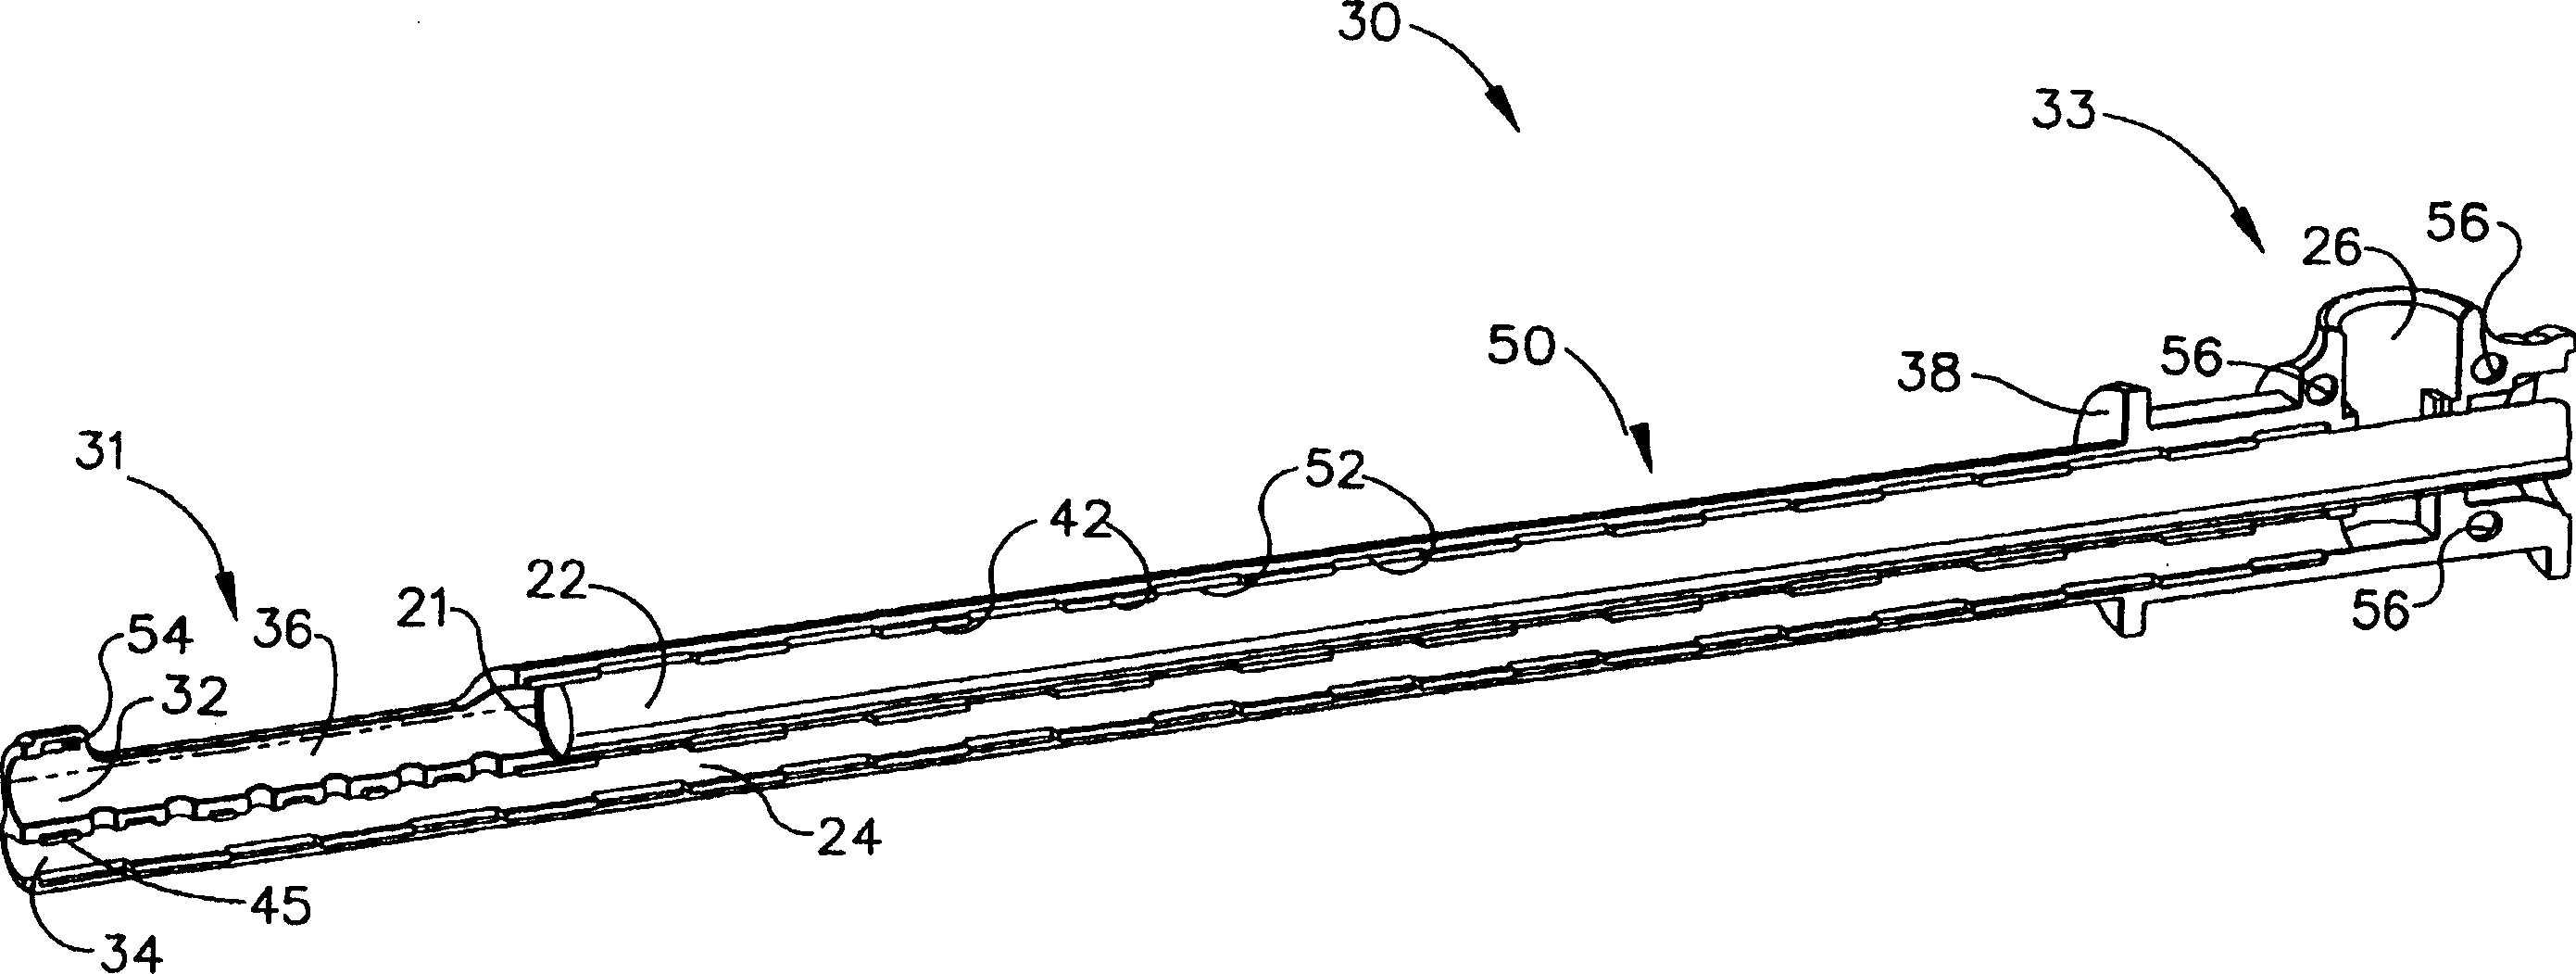 MRI compatible surgical biopsy device with tip leaving pseudo-trace